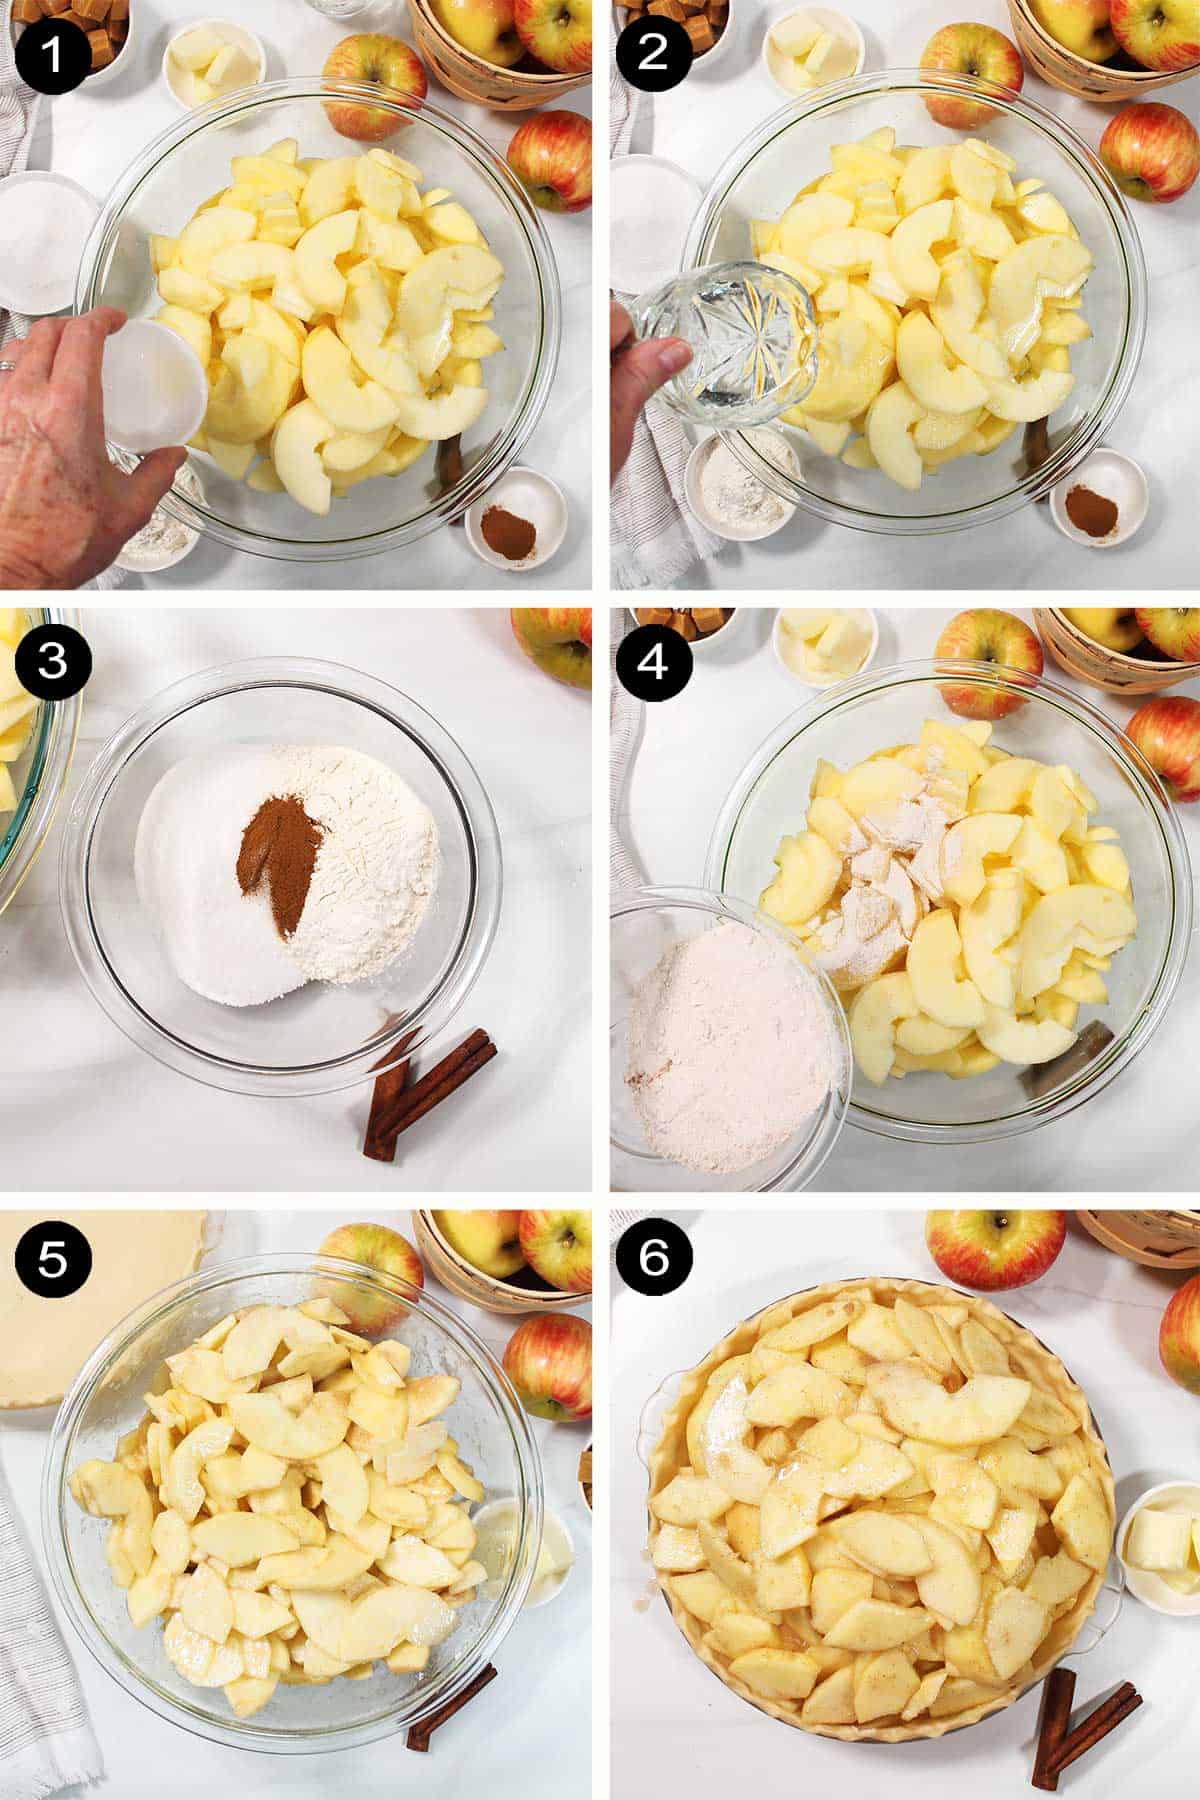 Steps to make apple crumble pie recipe.